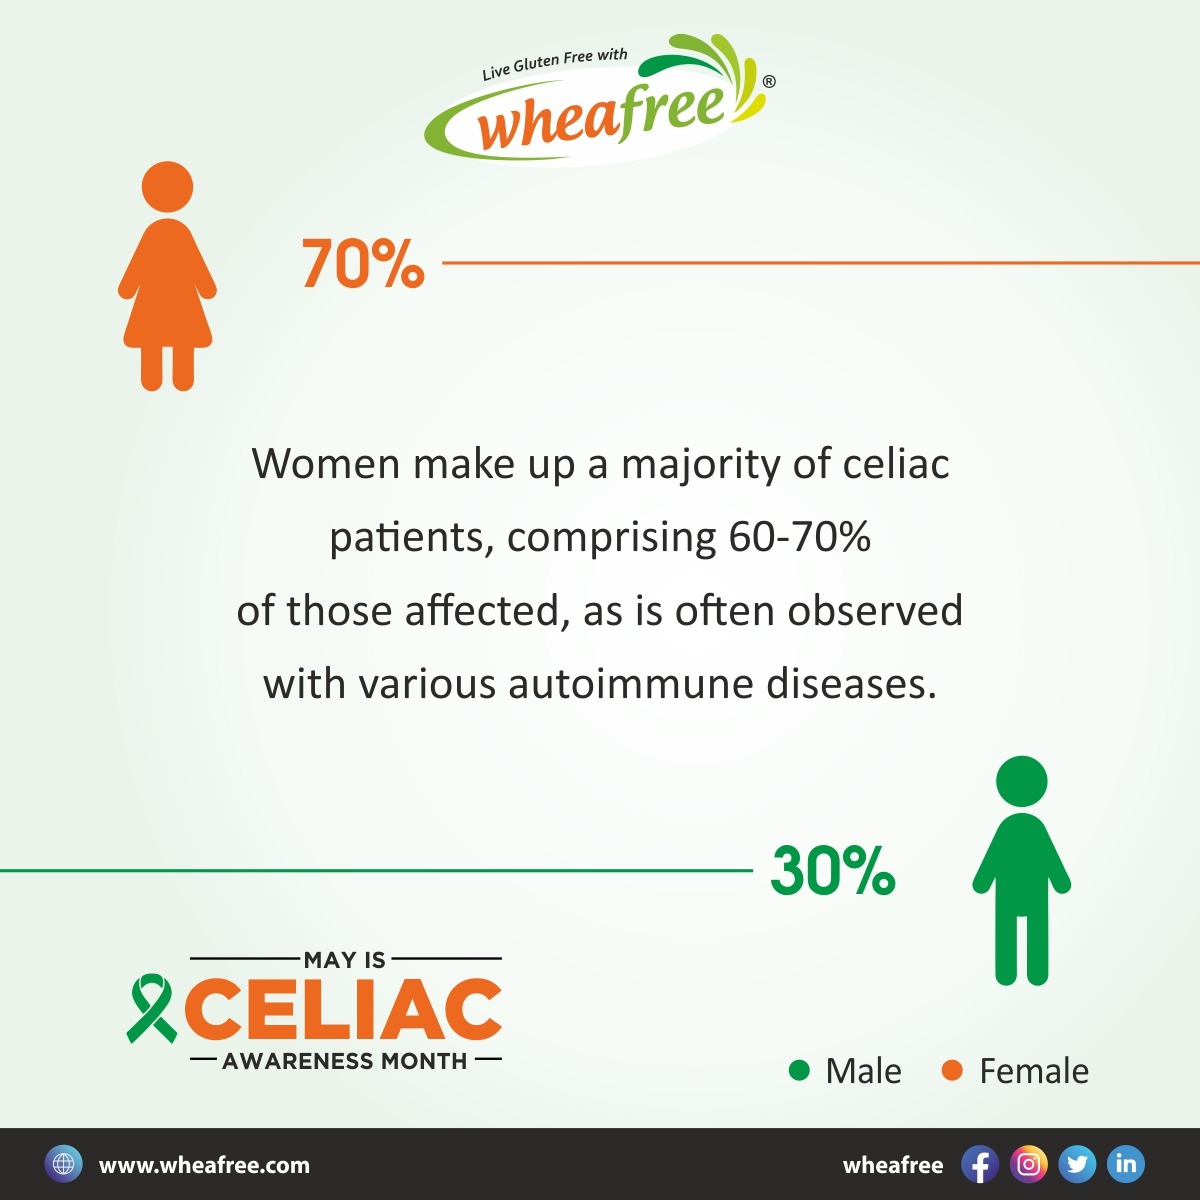 Did you know? Celiac disease affects women significantly. Stats show that women make up 60-70% of diagnosed celiac patients. This May, let's raise awareness and support women with celiac disease.

#wheafree #celiacawareness #celiac #glutenfree #Health